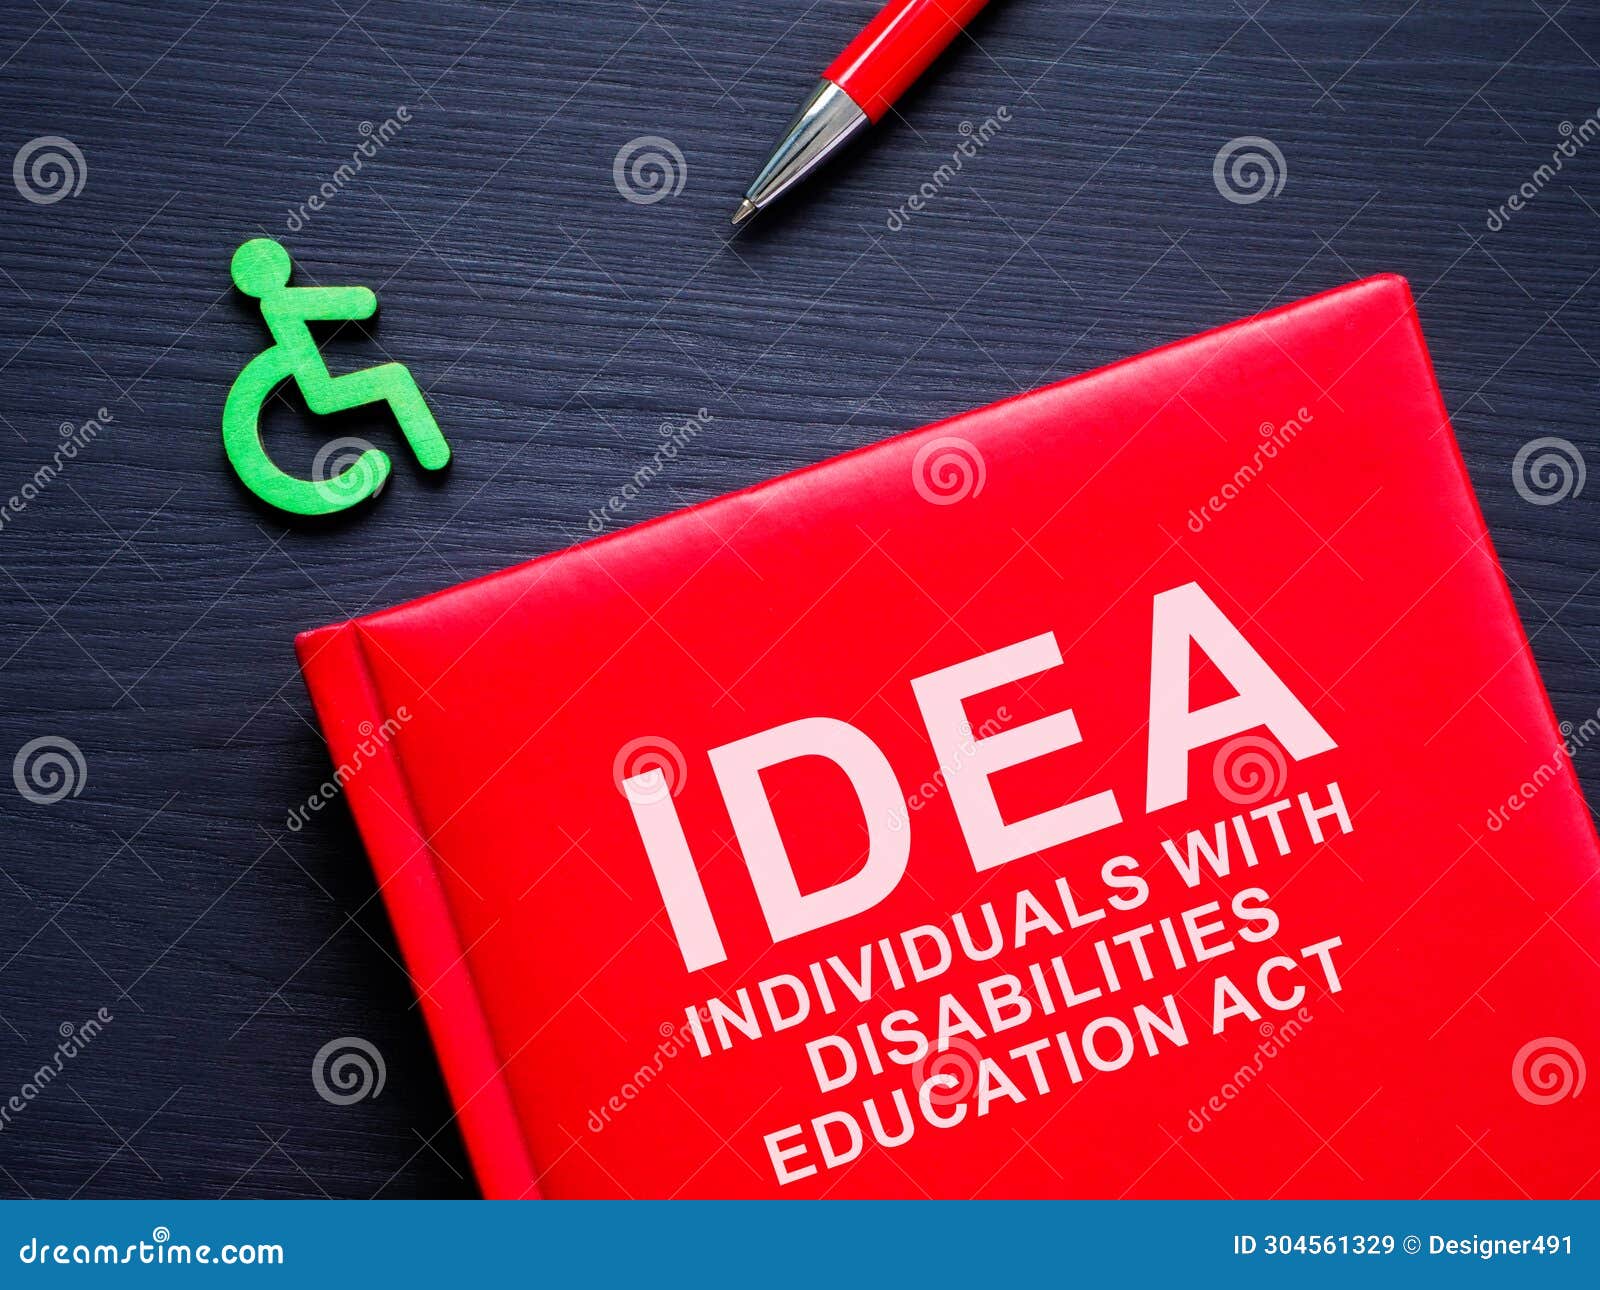 book idea individuals with disabilities education act.